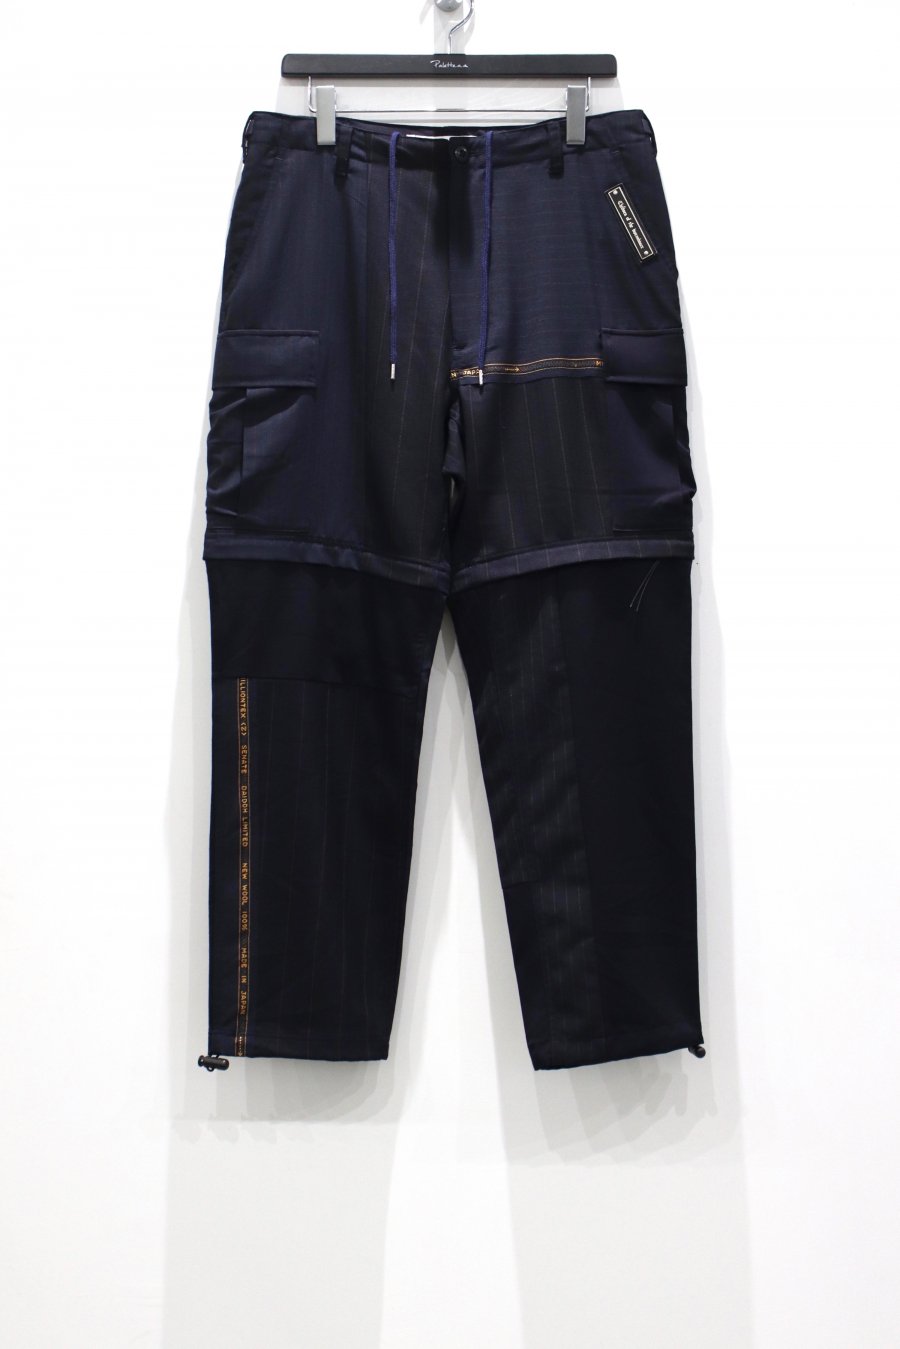 Children of the discordance   DEAD STOCK WOOL PATCHWORK TROUSERS(NAVY)<img class='new_mark_img2' src='https://img.shop-pro.jp/img/new/icons15.gif' style='border:none;display:inline;margin:0px;padding:0px;width:auto;' />